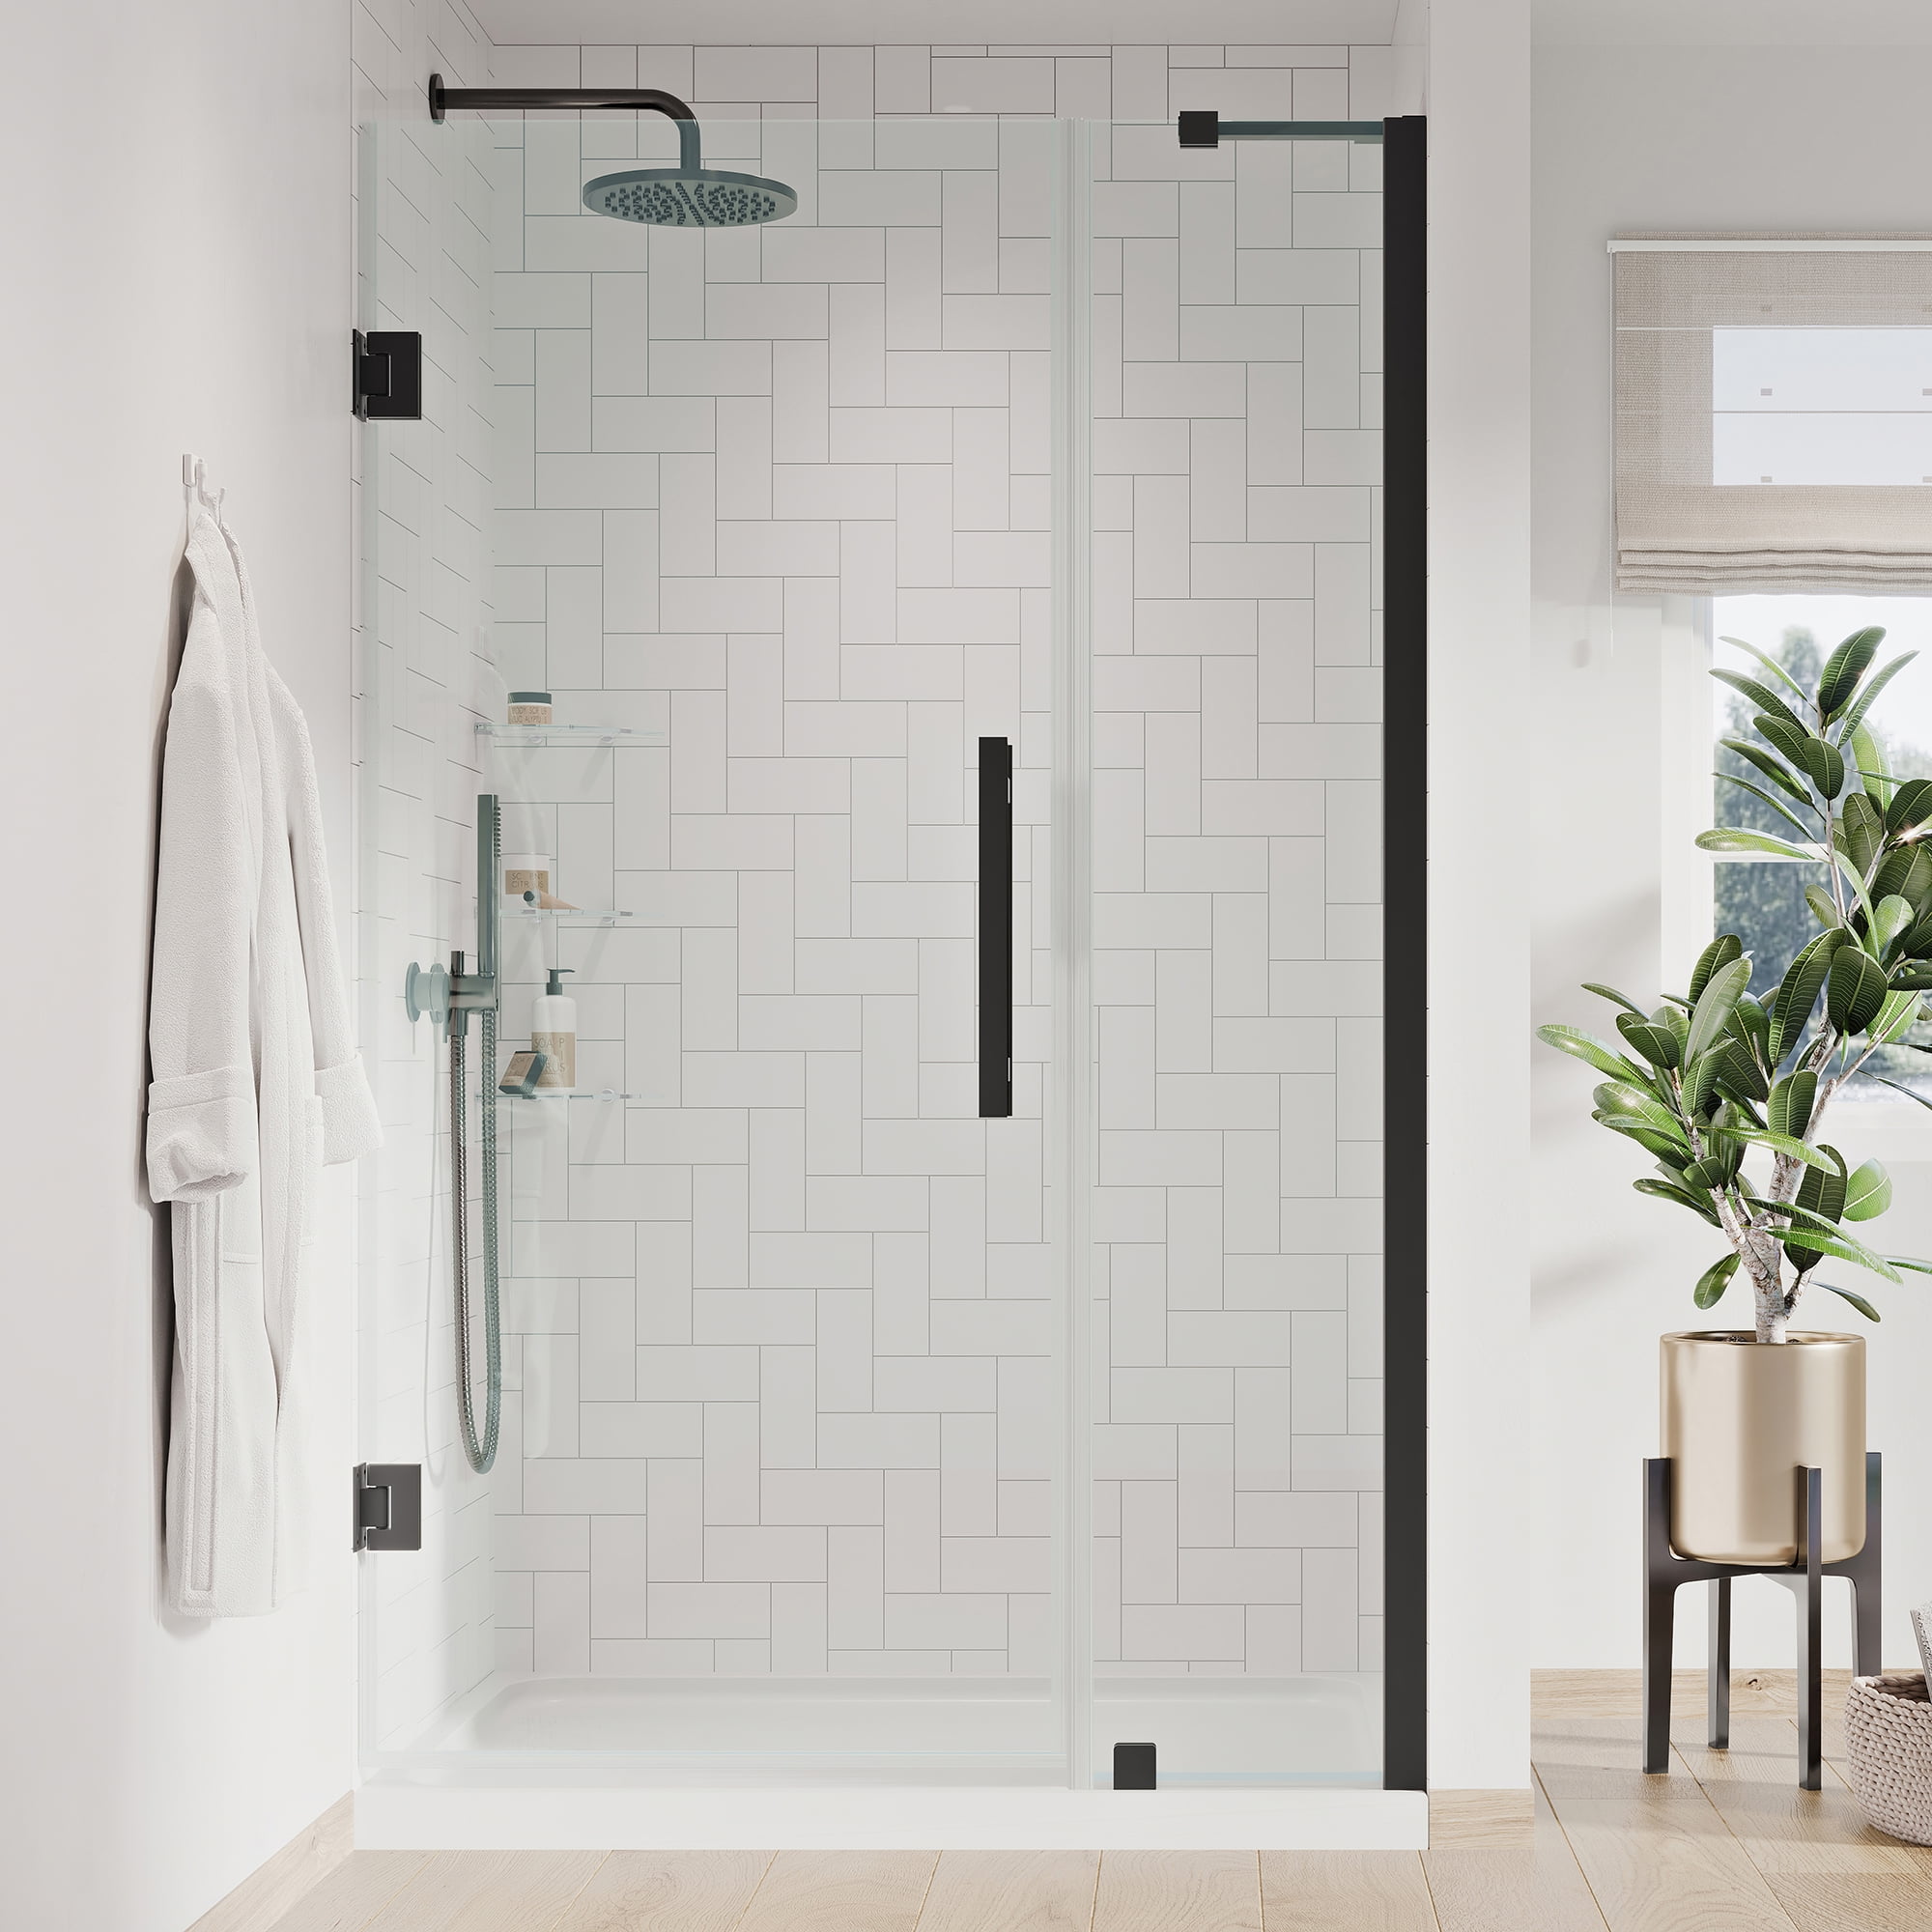 Ove Decors Endless TP01404C1 TampaPro, Alcove Frameless Hinge Shower Door and Base, 38 in. W x